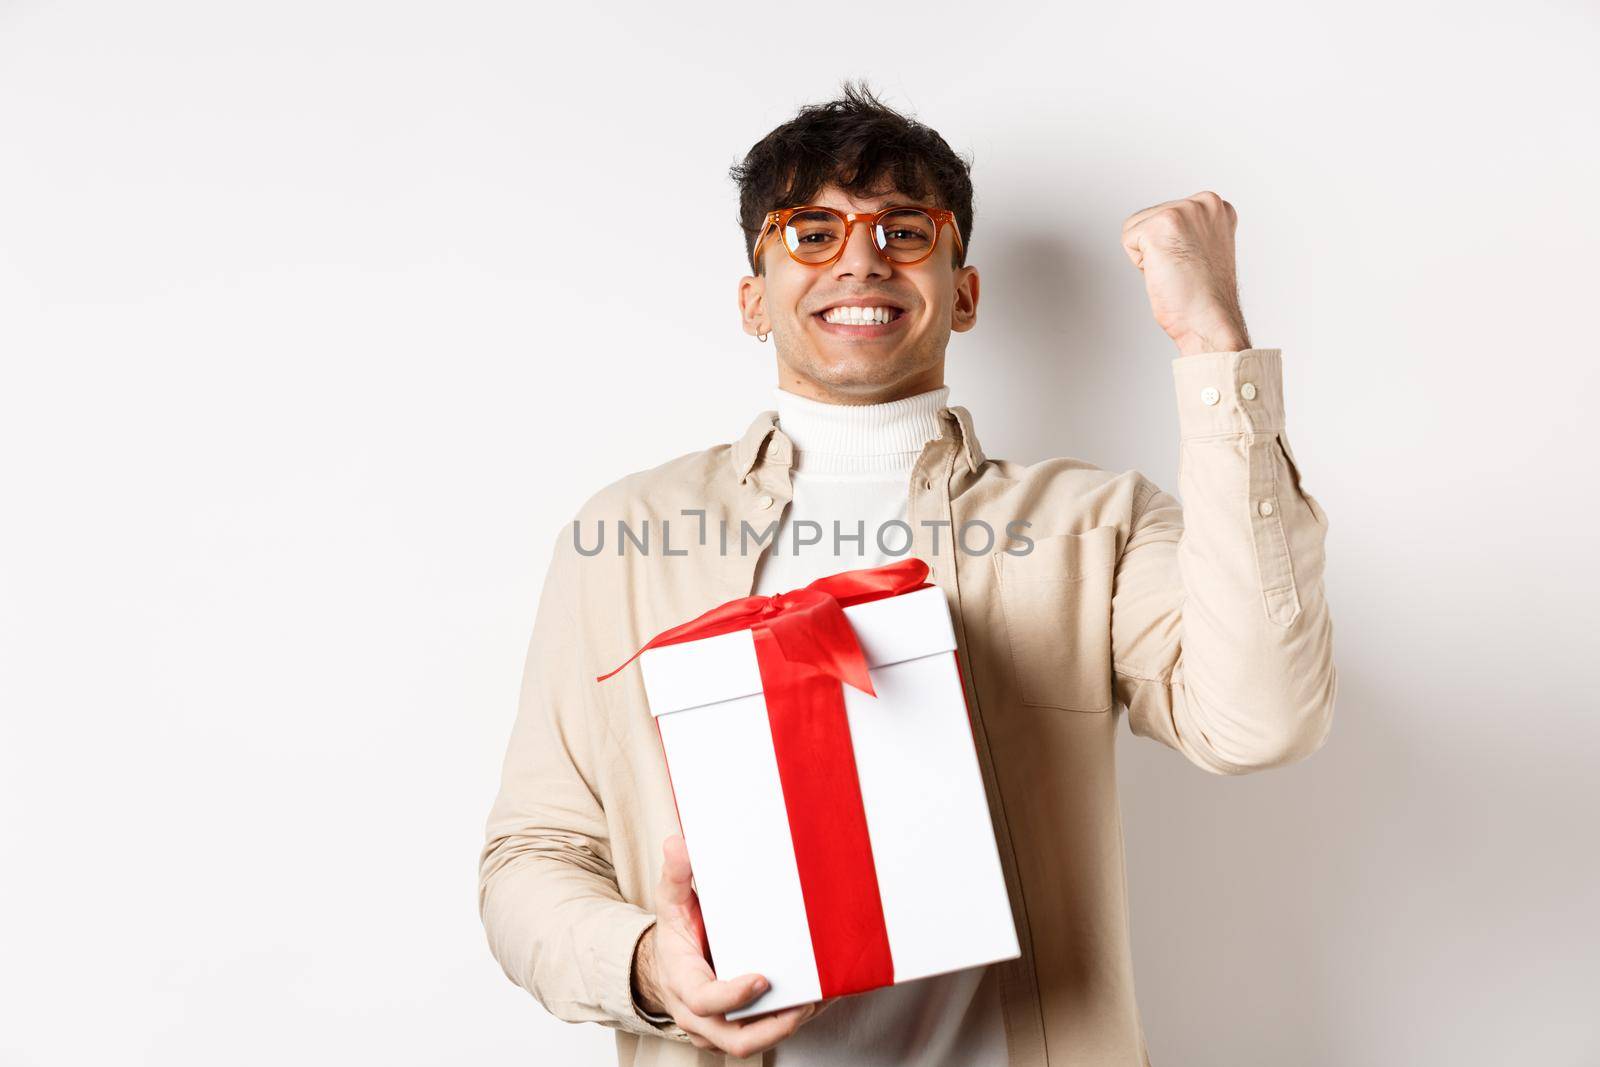 Cheerful guy saying yes as receiving gift, making fist pump and rejoicing, got present, standing on white background.